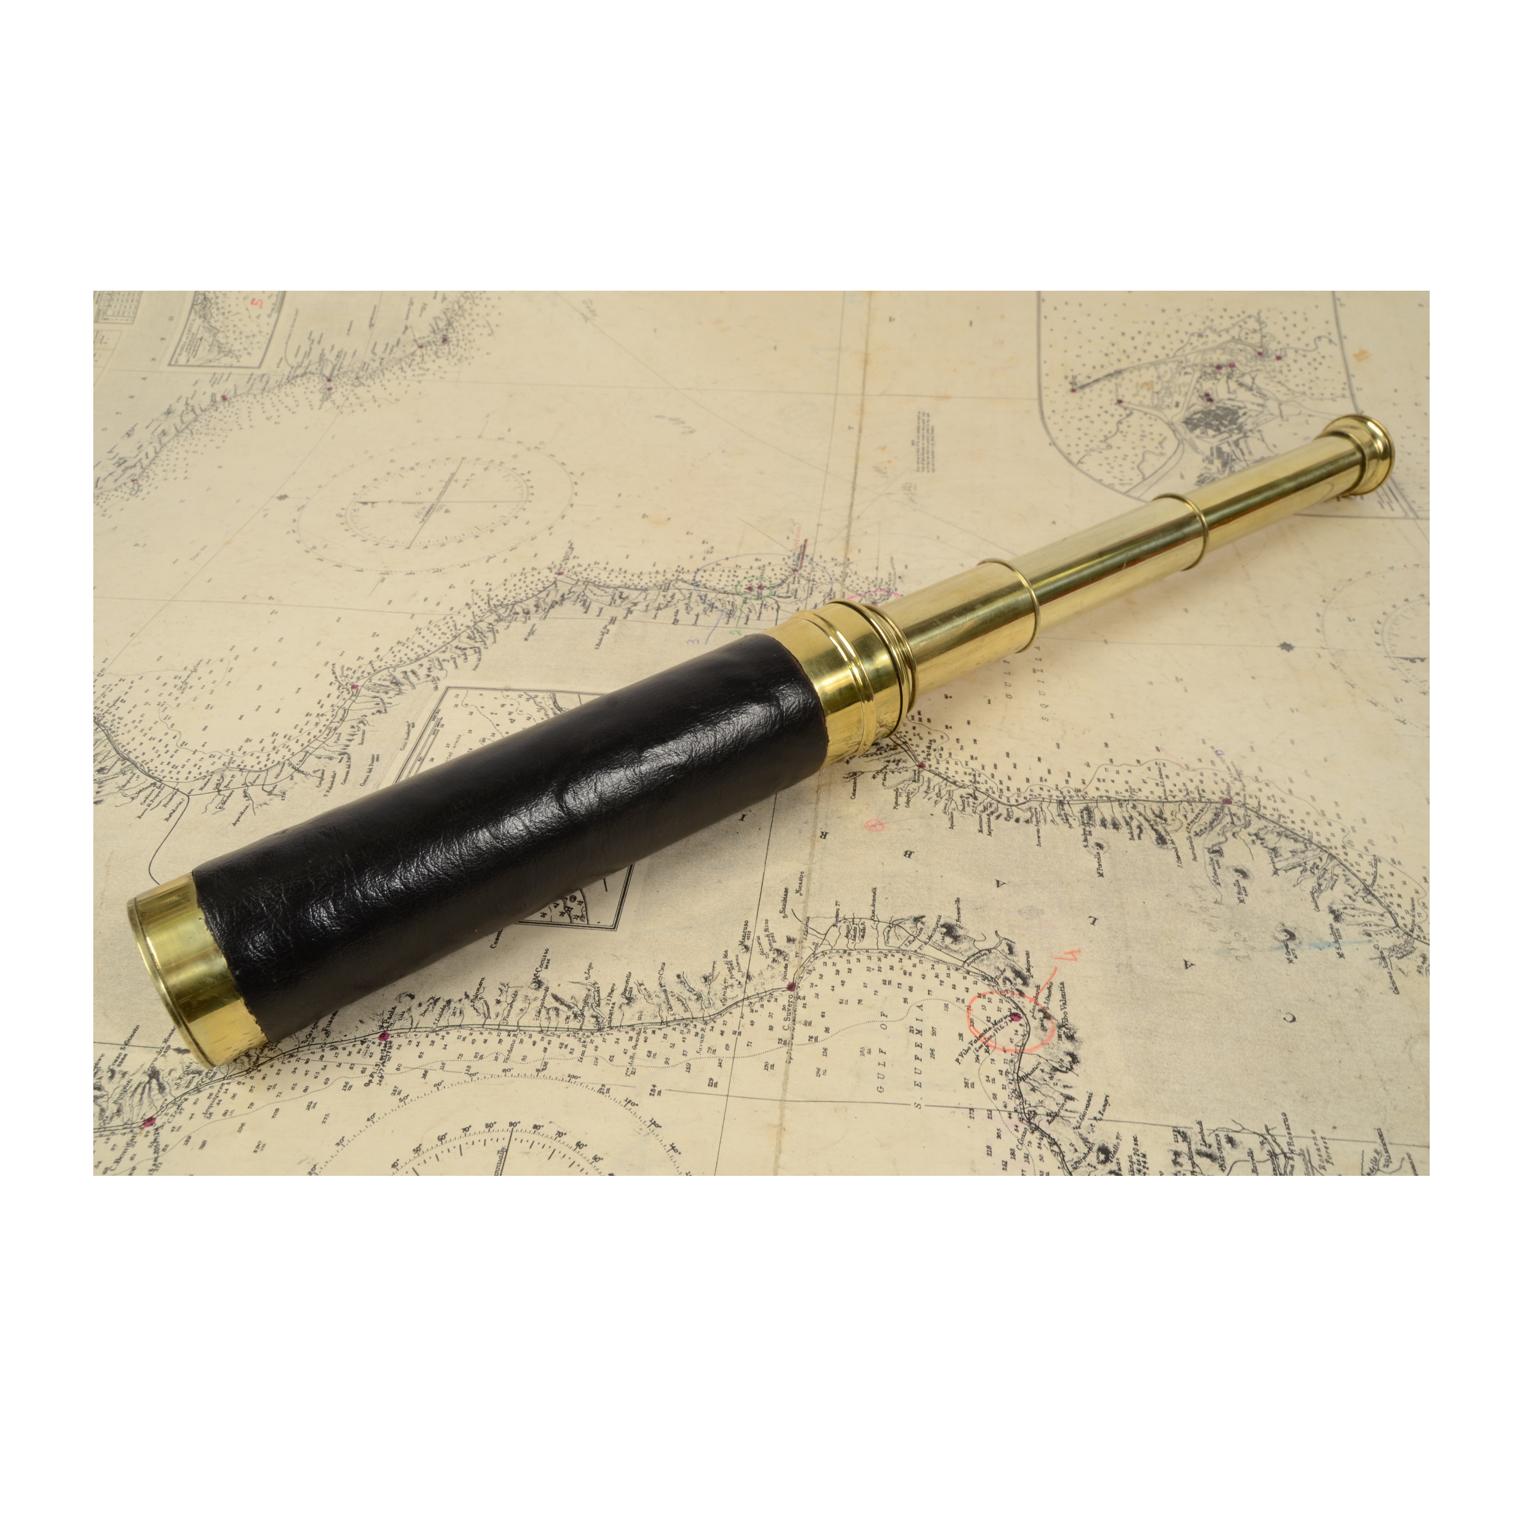 Brass telescope with leather-covered handle, focusing with three extensions. Maximum length 72 cm, minimum 24.5 cm, focal diameter 4 cm. French manufacture from the second half of the 19th century. Excellent condition, fully functional, complete